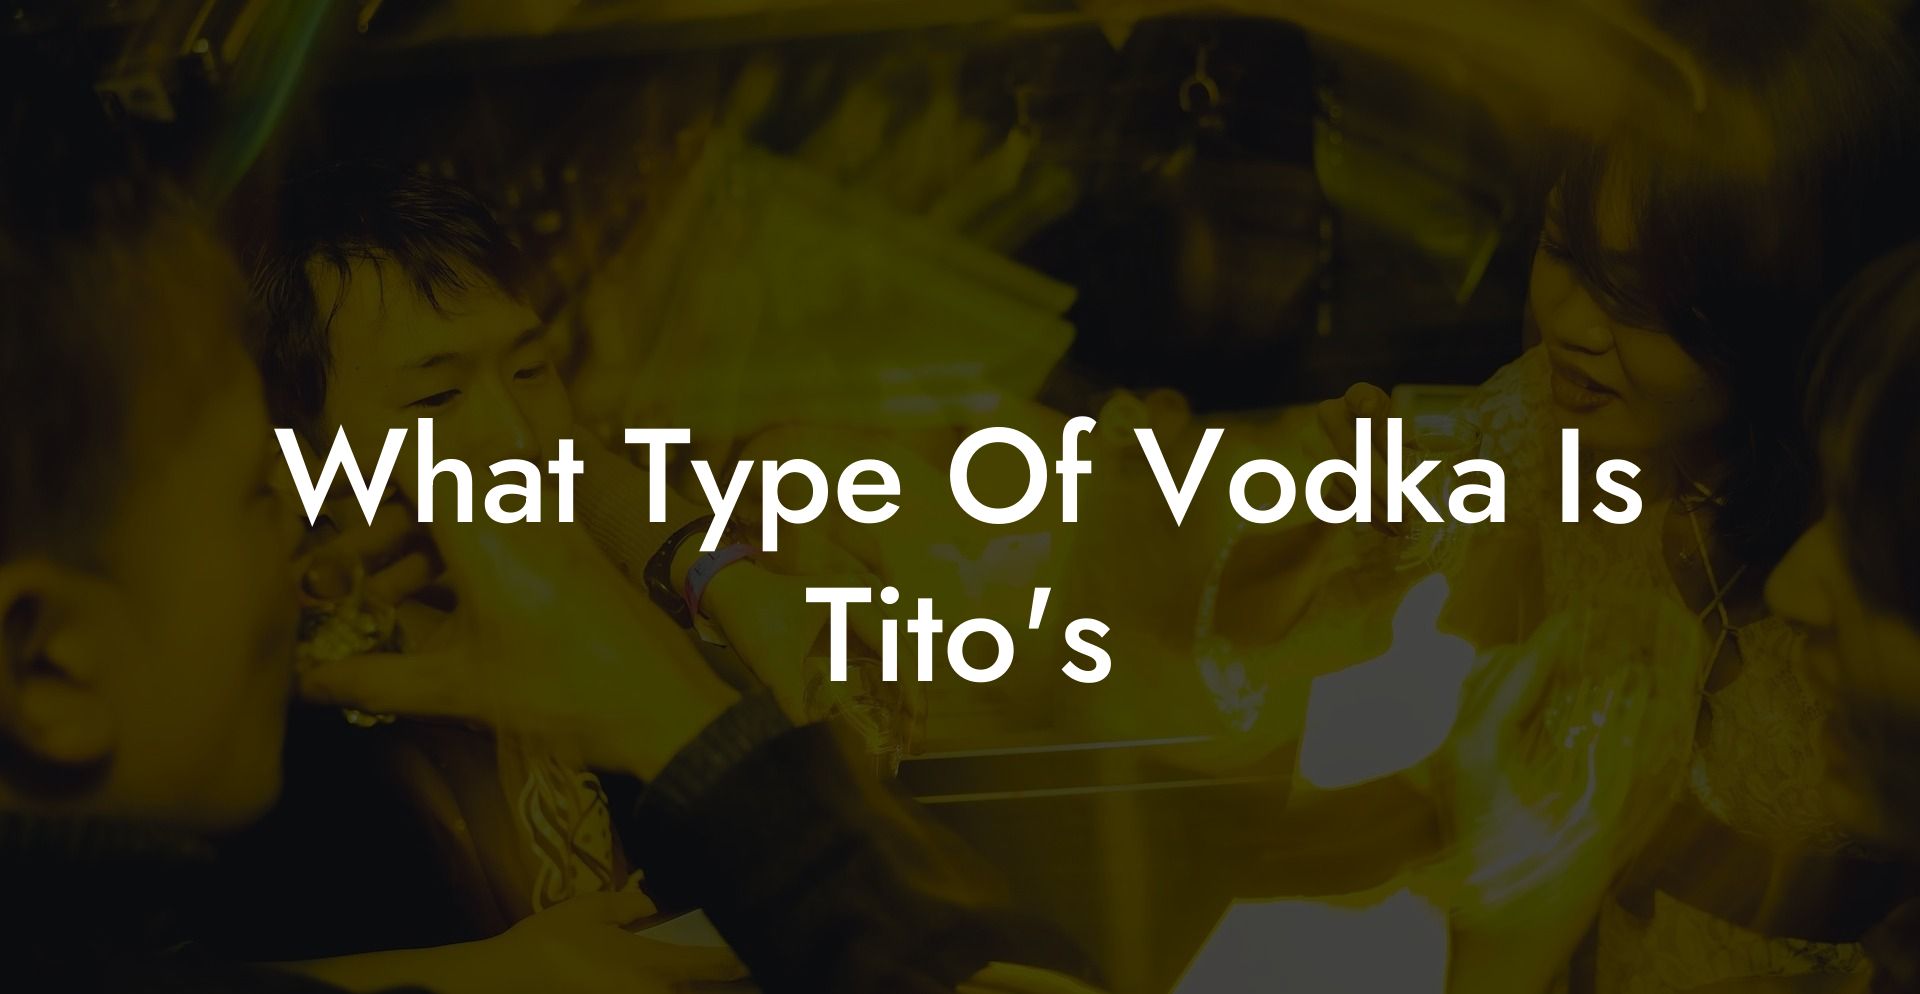 What Type Of Vodka Is Tito's